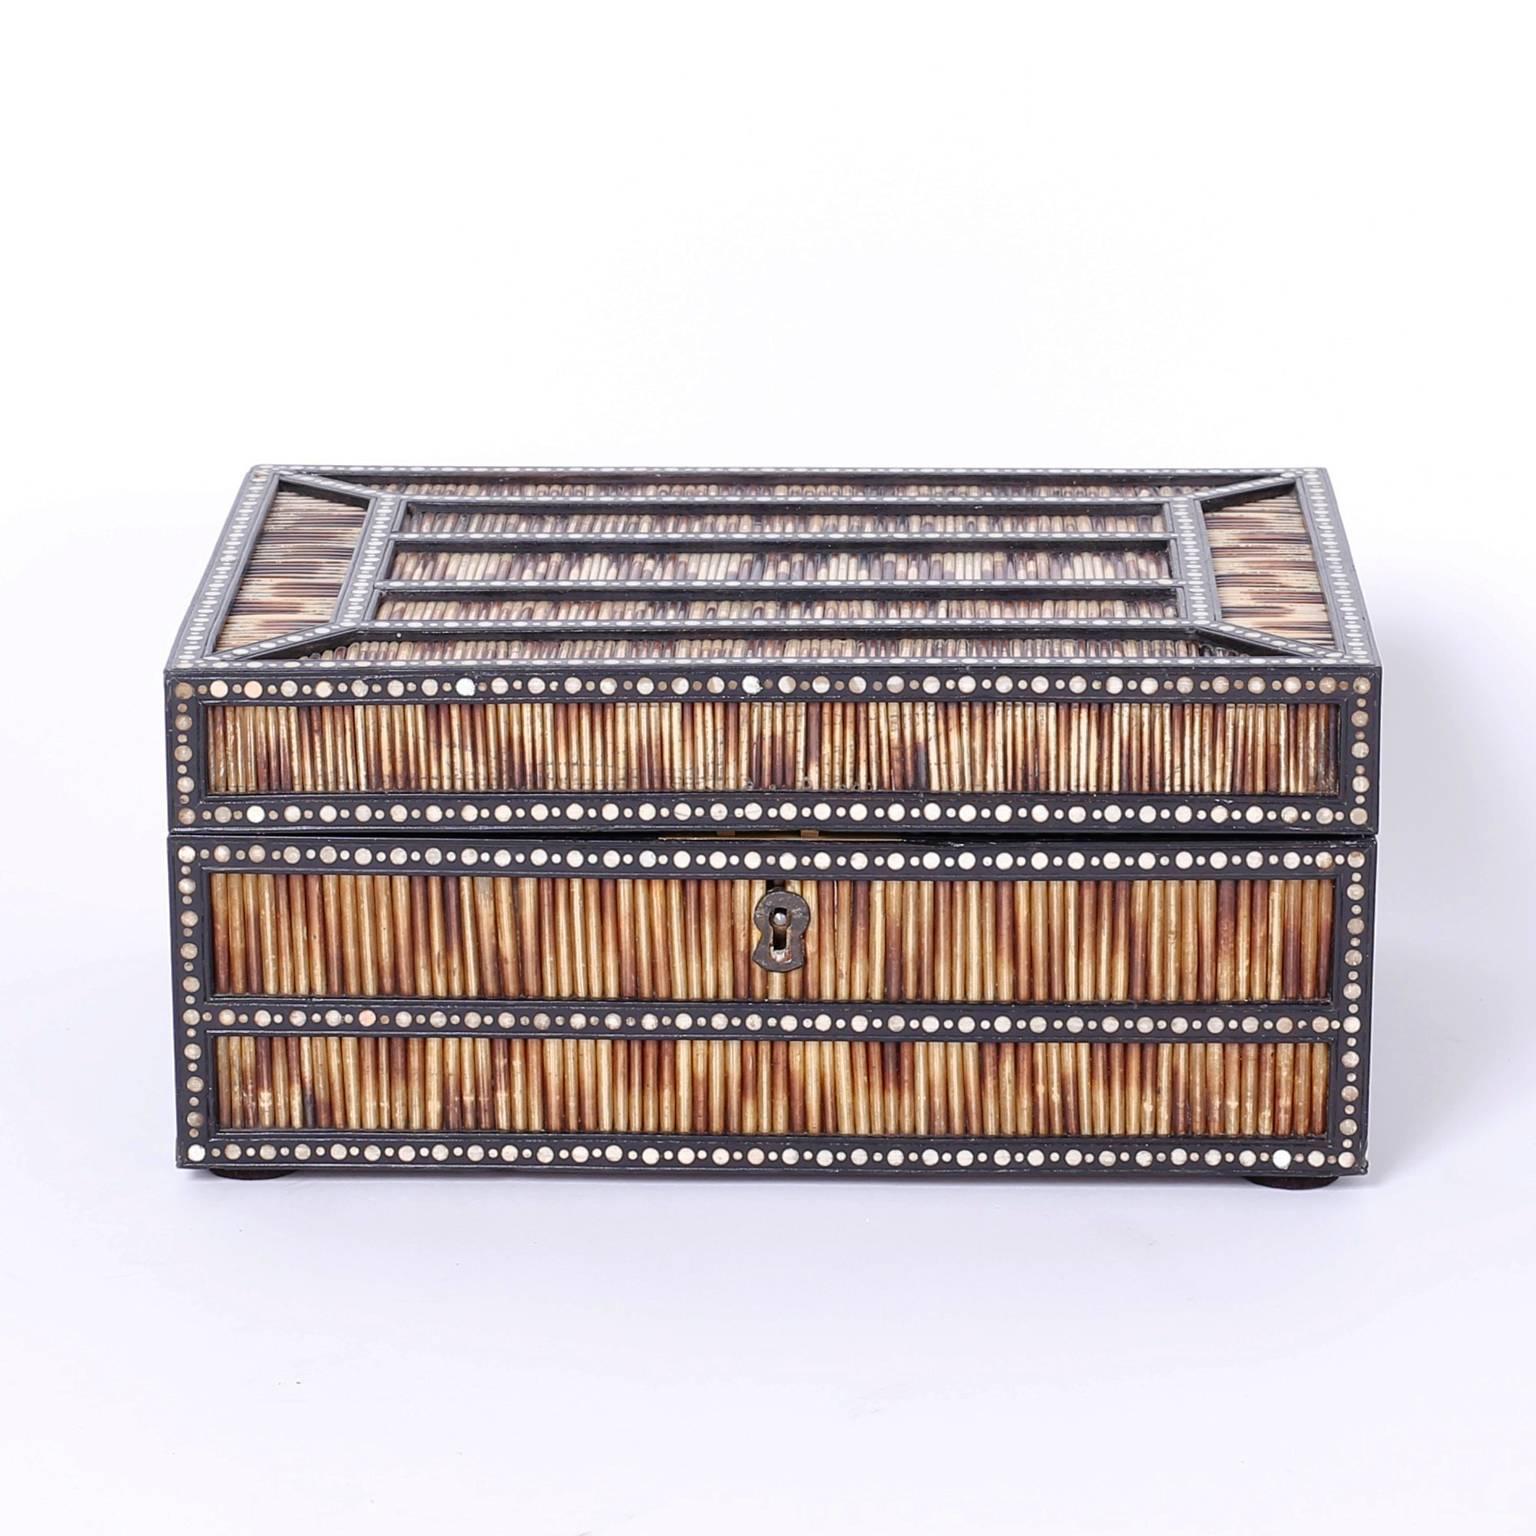 Intriguing rare antique box crafted in tropical hardwoods, porcupine quills, and bone dot inlays. The interior features a panel depicting two elephants intertwined with symbolic floral designs and rare and unusual five quill lidded compartments, a